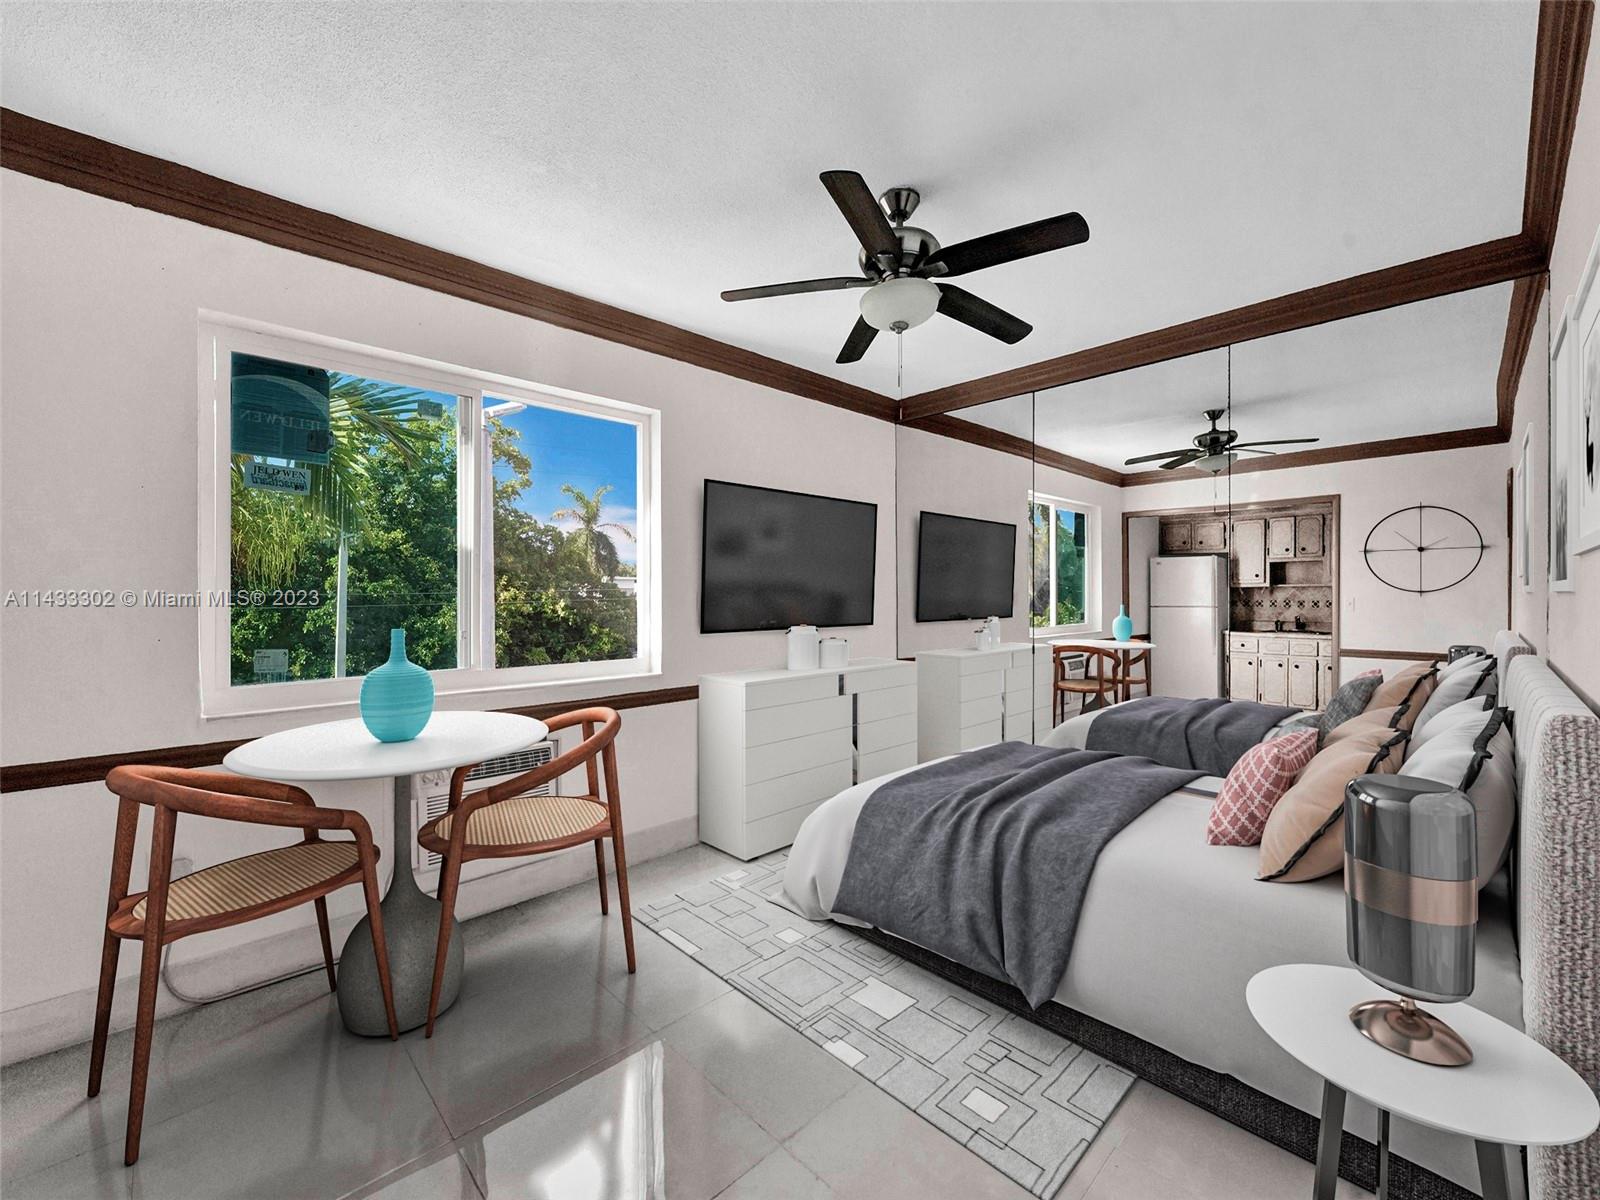 Remarkable, Cozy, Studio Unit centrally located in the heart Of North Miami. High Impact window, porcelain floors, full size kitchen, lots of natural light. Updated well kept building with laundry room on the first floor. Relaxing waterfront deck ideal to watch the sunset, and boats drive by with stunning views. Bring your kayak, and go for a nice ride to the beach!! Water, and garbage included in rental amount. THIS UNIT DOES NOT HAVE AN ASSIGNED PARKING SPOT, TENANT MUST PARK IN THE STREET WHICH IS HARD TO FIND. Ideal Unit for someone who drives a scooter, bike, or uses public transportation. Centrally located Minutes from Aventura Mall, Sunny Isles Beaches, and much more. Send best offer along with prove of funds.